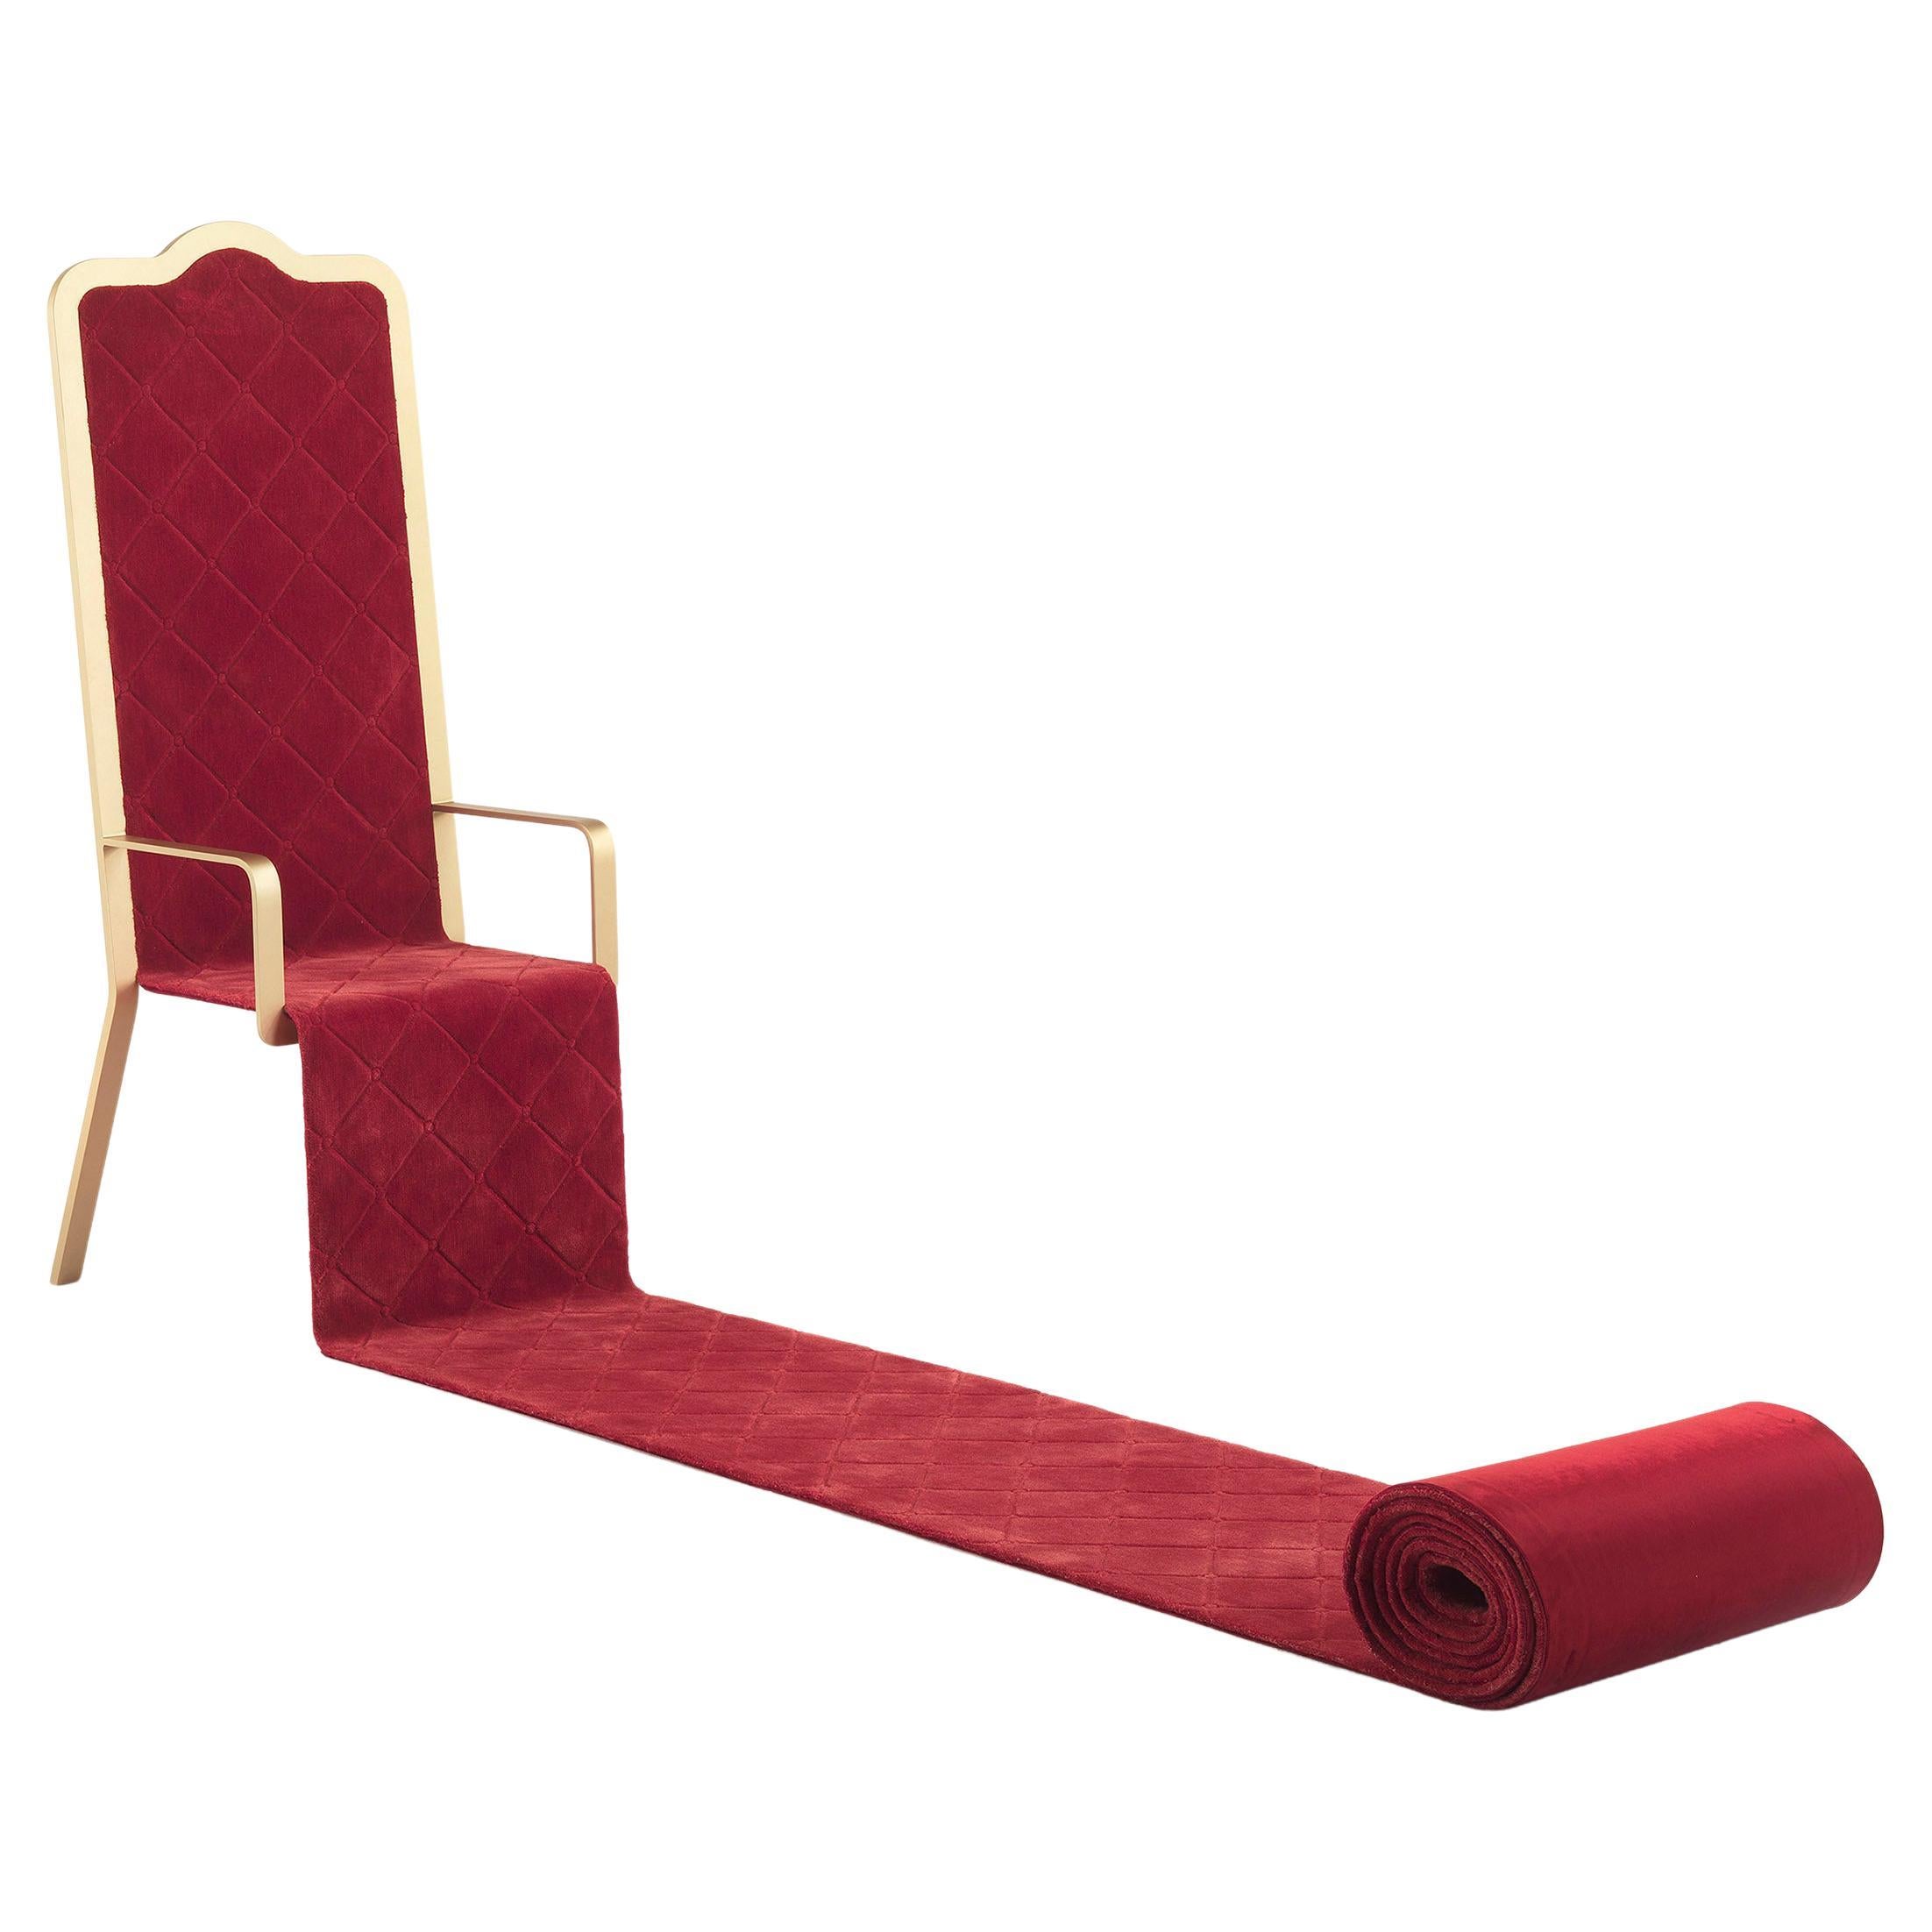 21st Century Osforth Throne in Red Velvet by Emanuele Magini - Limited Edition For Sale